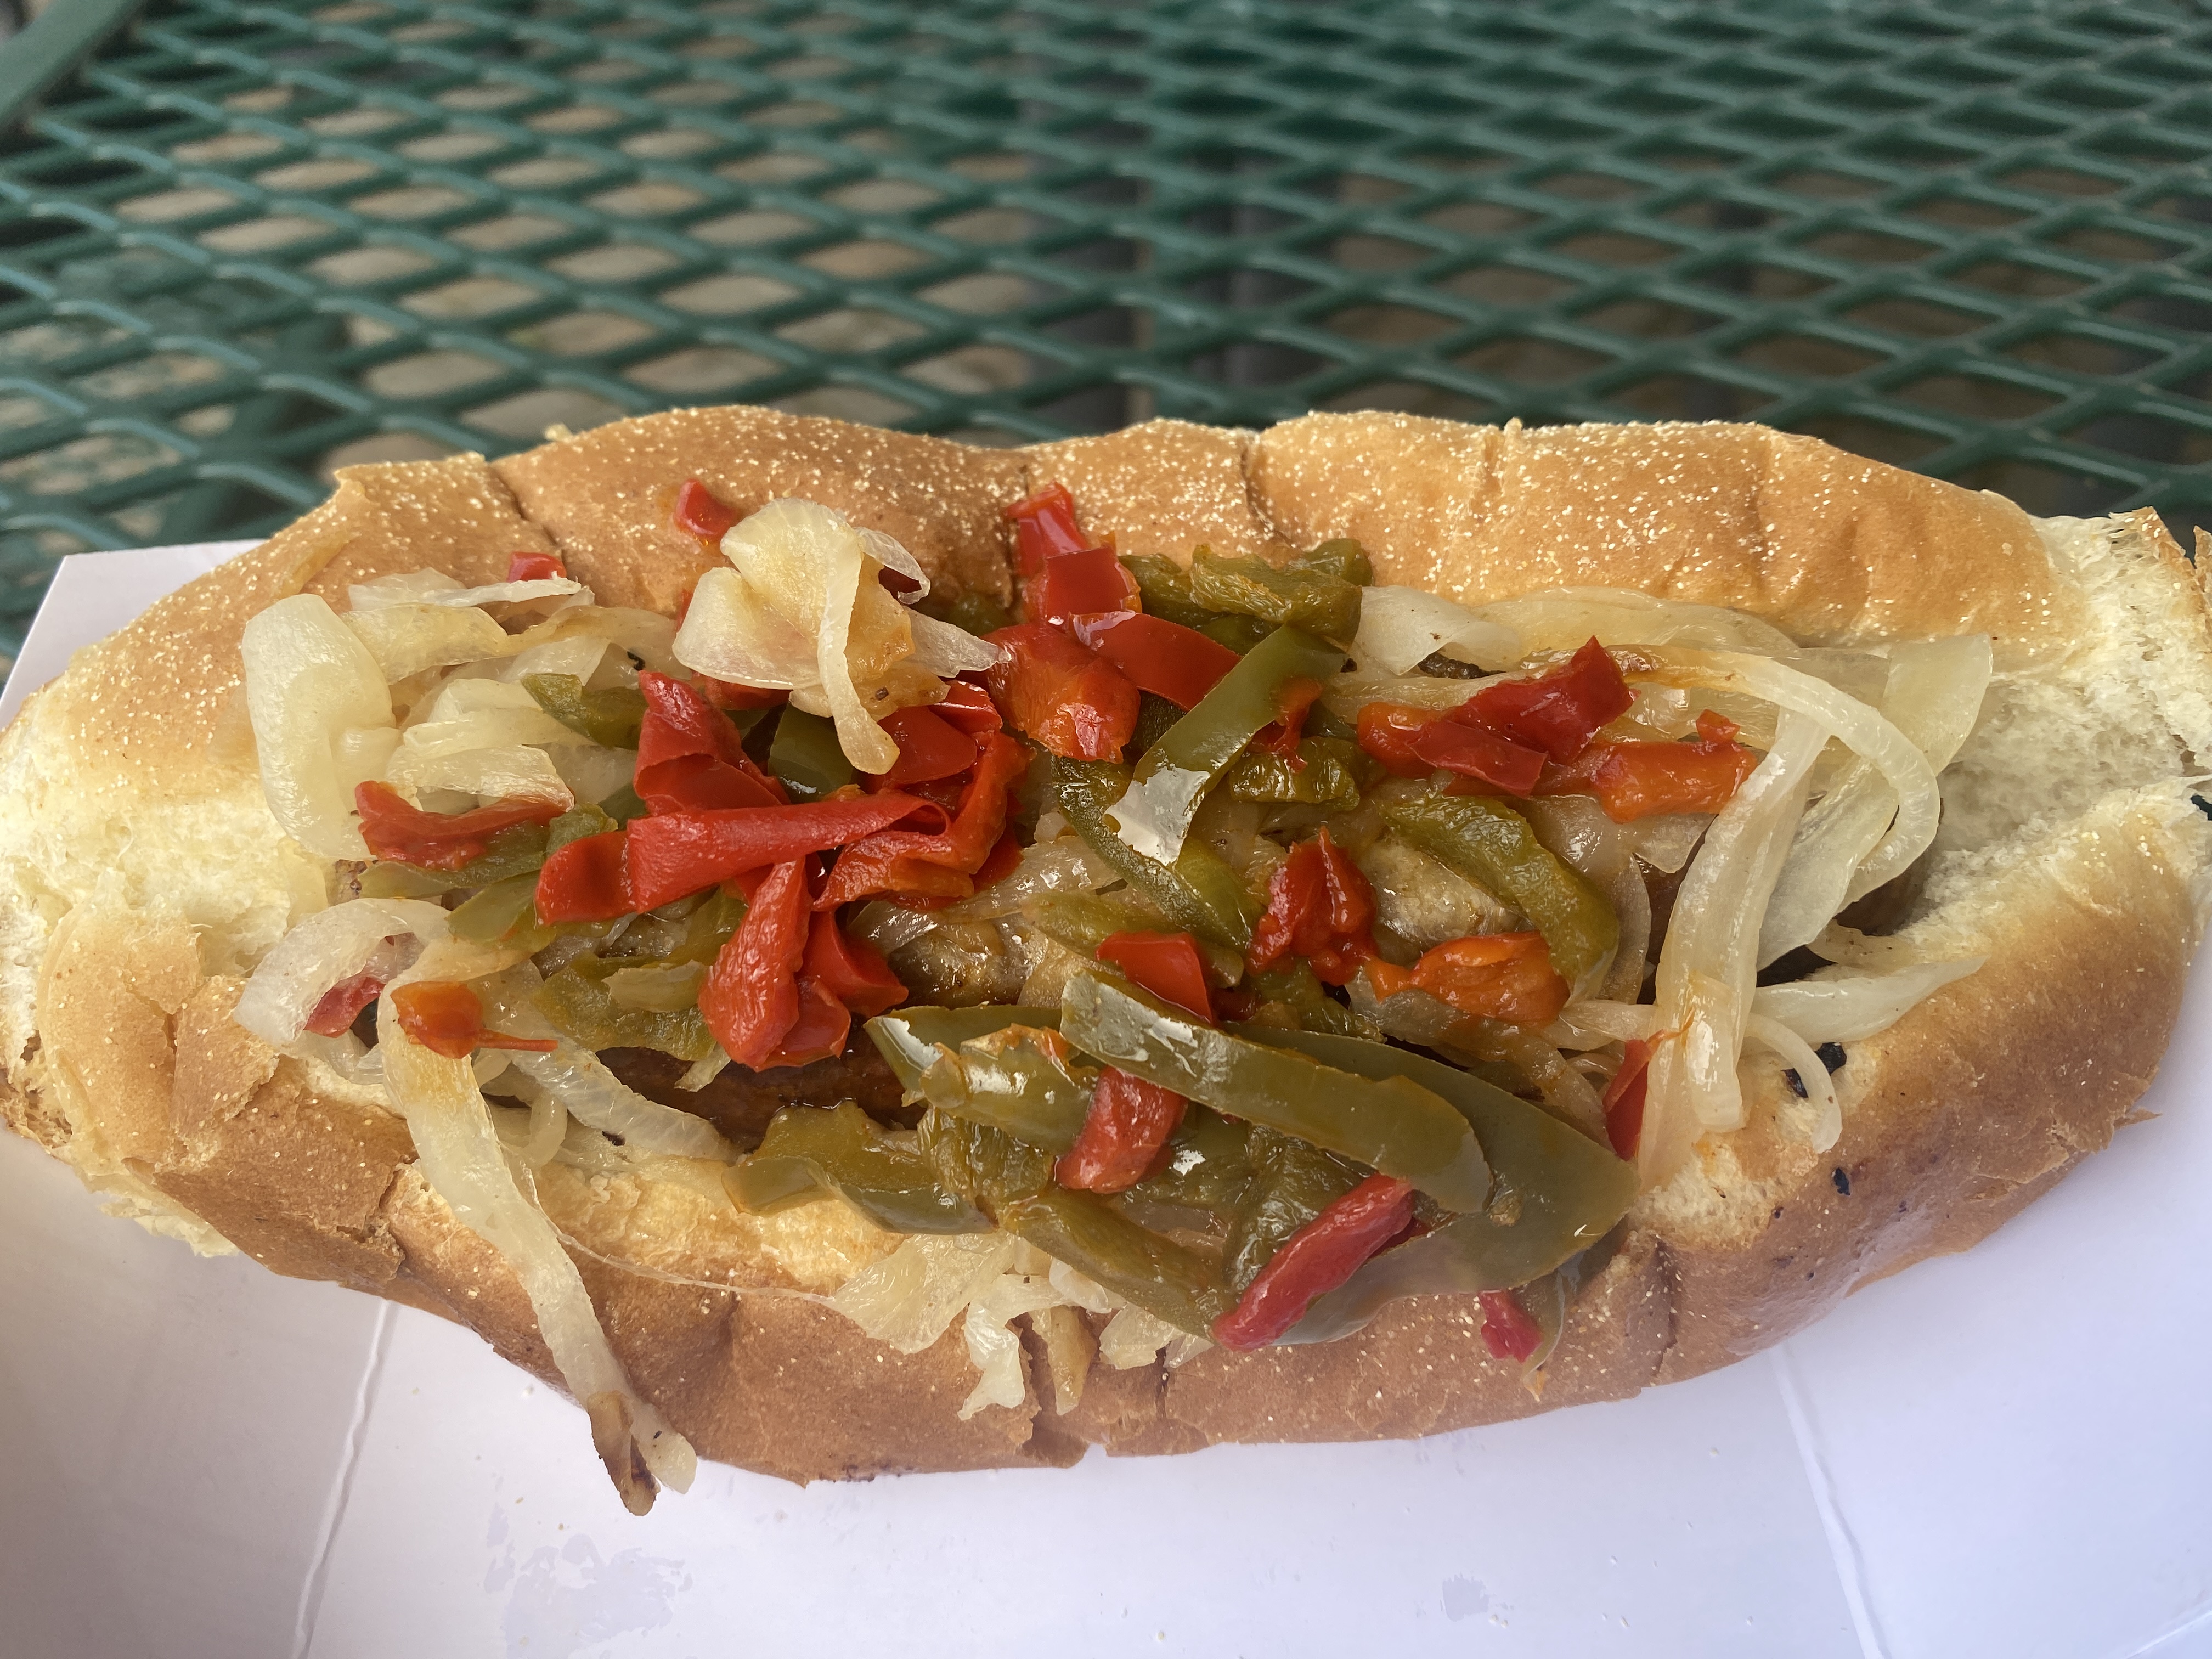 The sausage sandwich from PZO's is obscured by a heaping helping of peppers and onions on Wednesday, Aug. 23, 2023, on Restaurant Row at the New York State Fair. Samantha House | shouse@syracuse.com